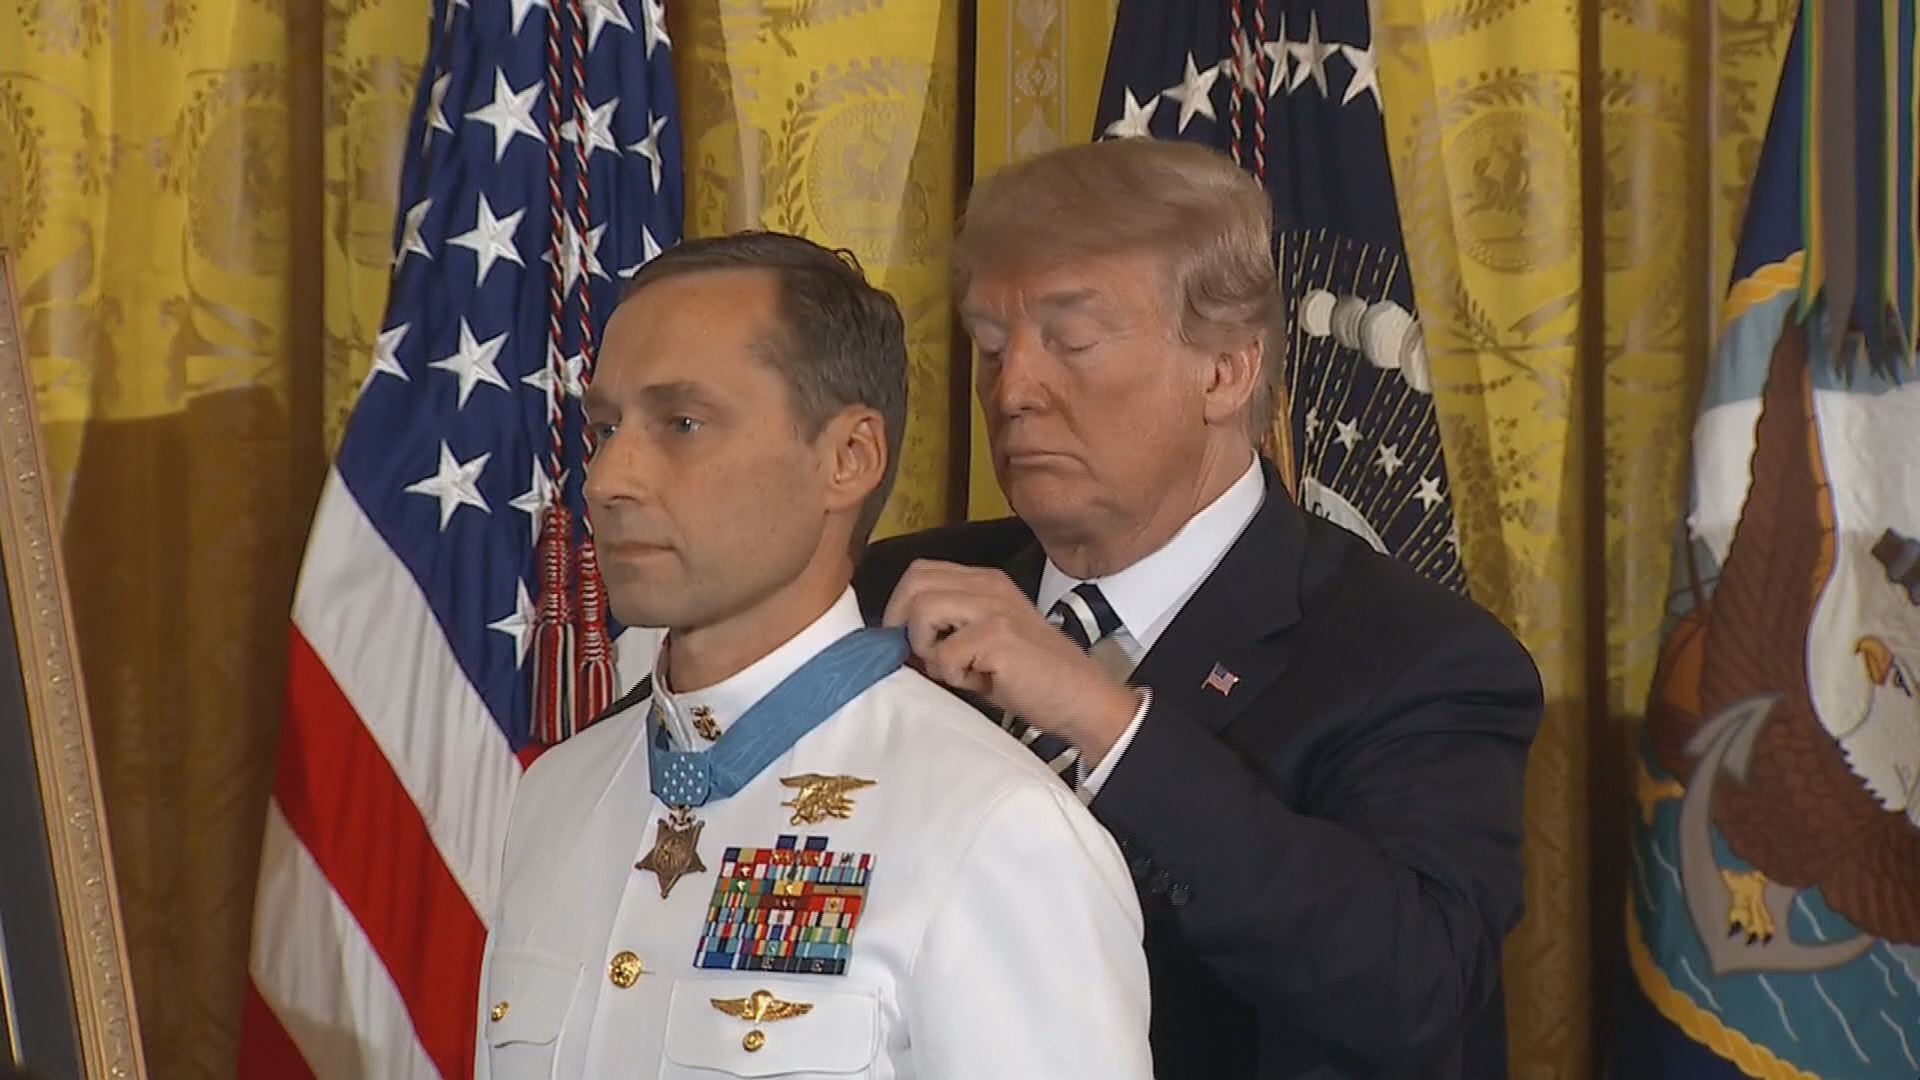 President Donald Trump awards the Medal of Honor to a Navy SEAL who oversaw a daring assault and rescue mission on a snowy Afghanistan mountaintop in 2002.